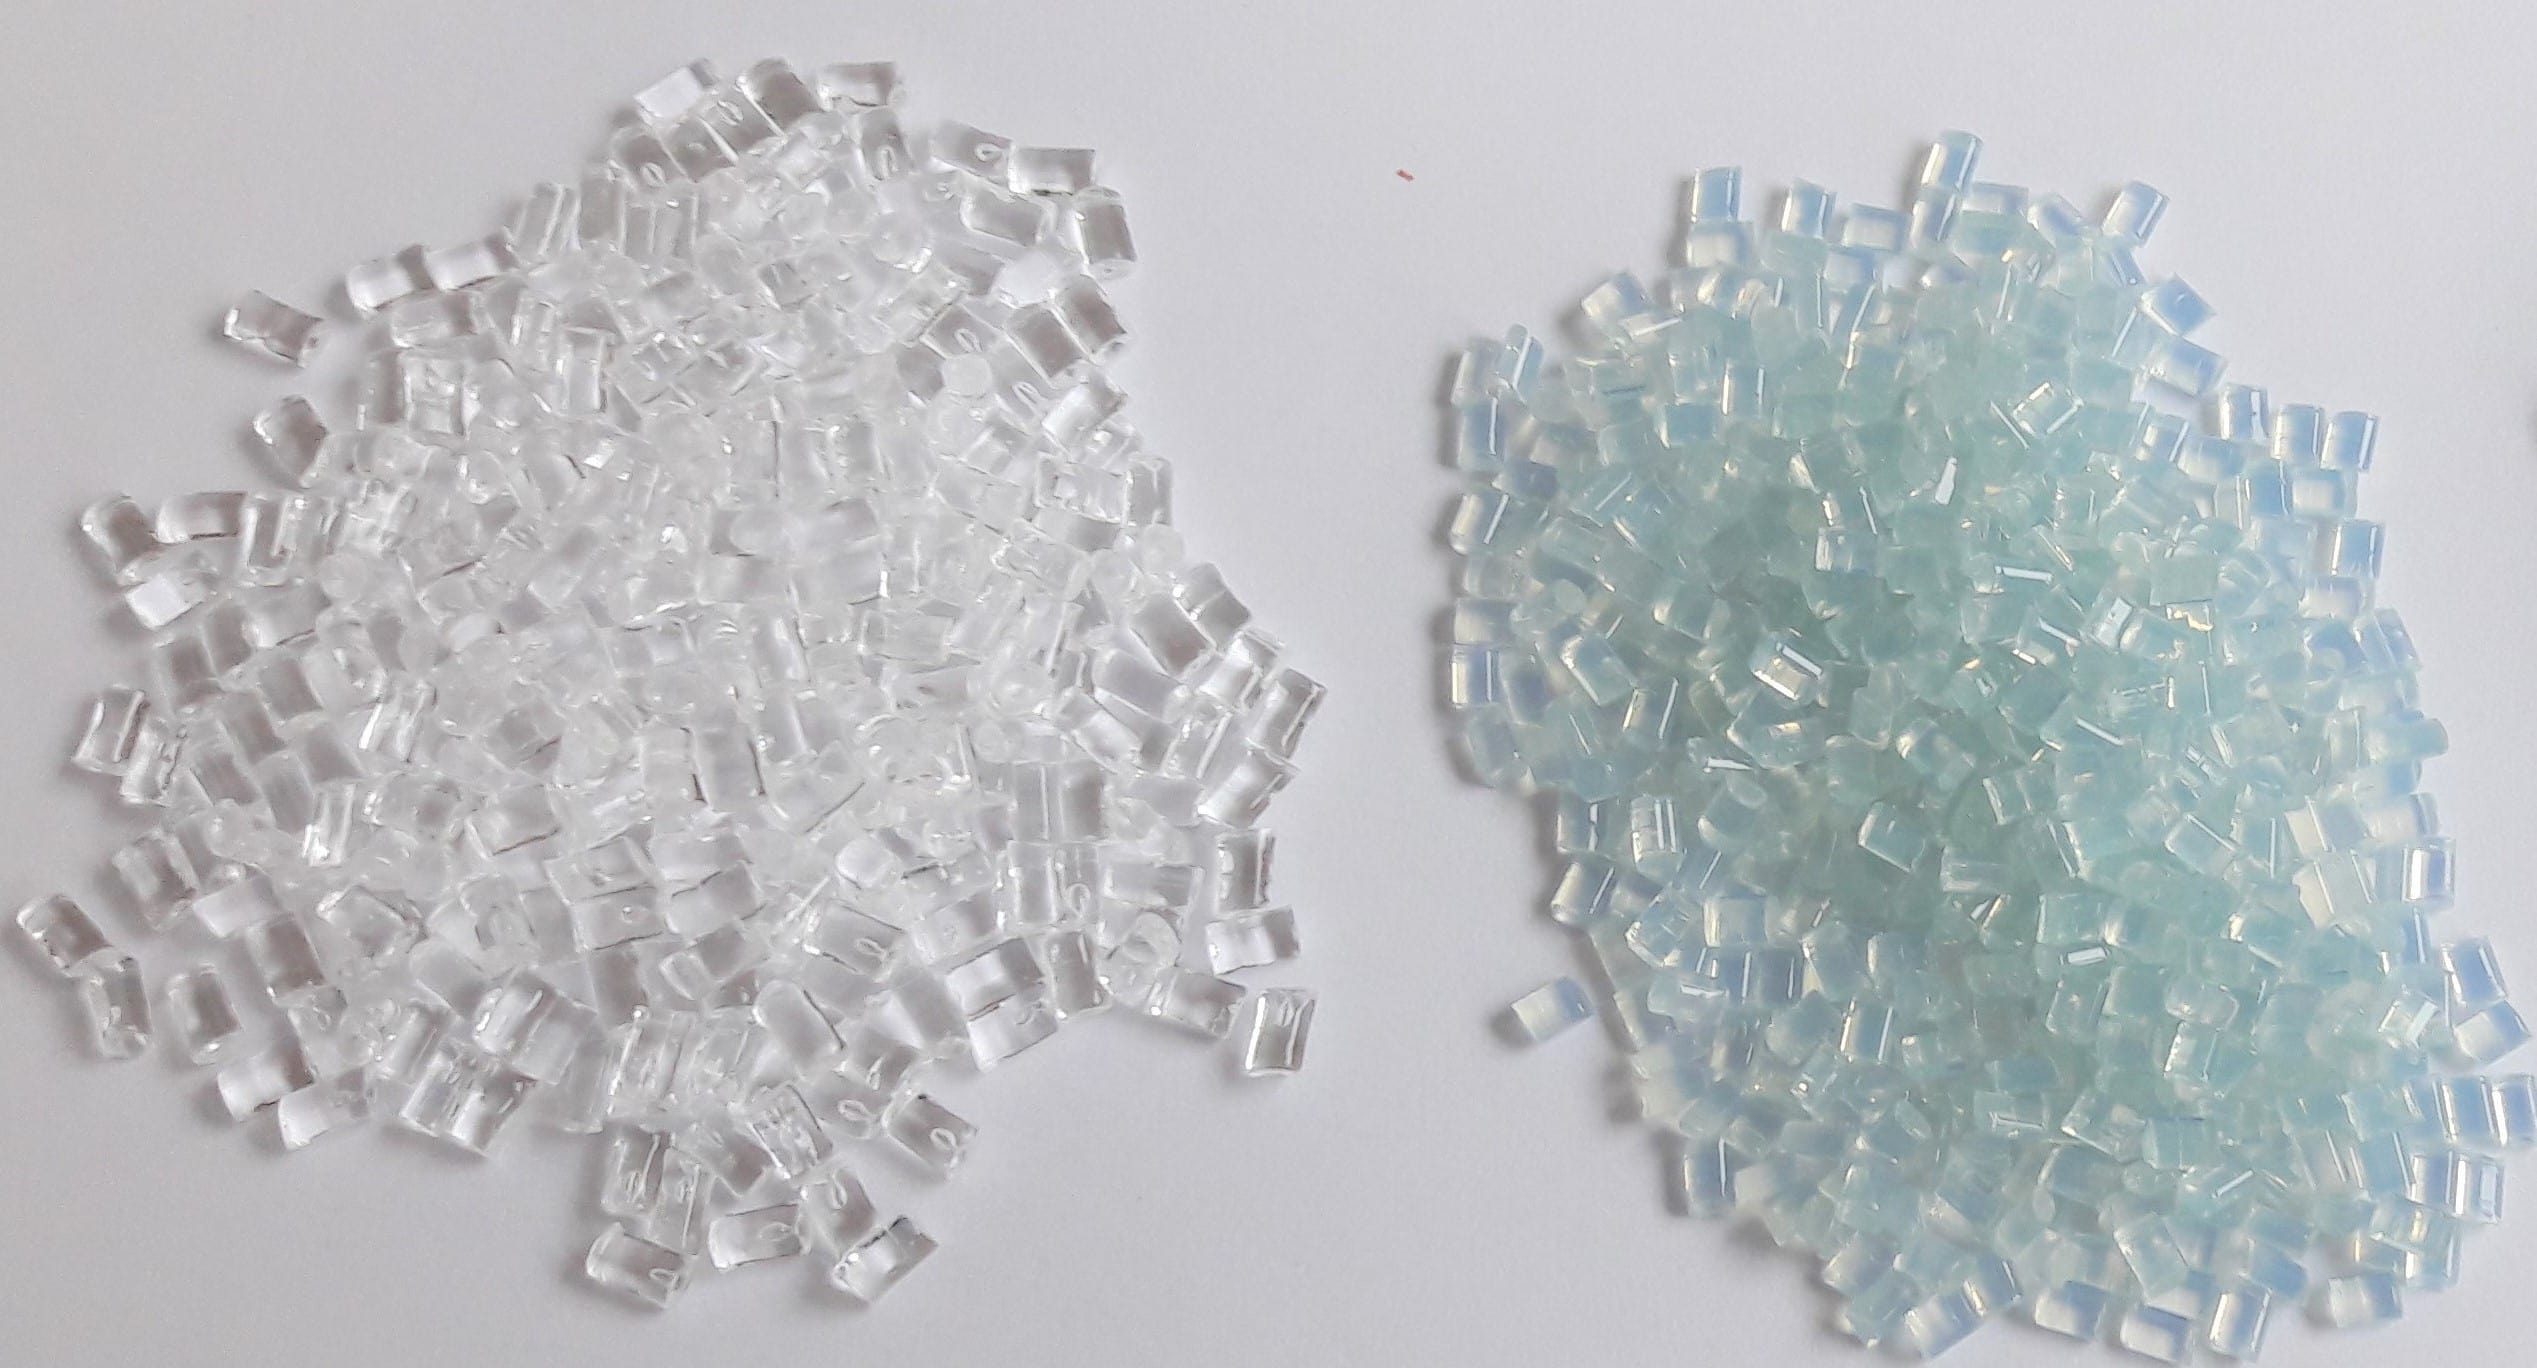 Coloring of plastics with a laser-absorbing dye (right).